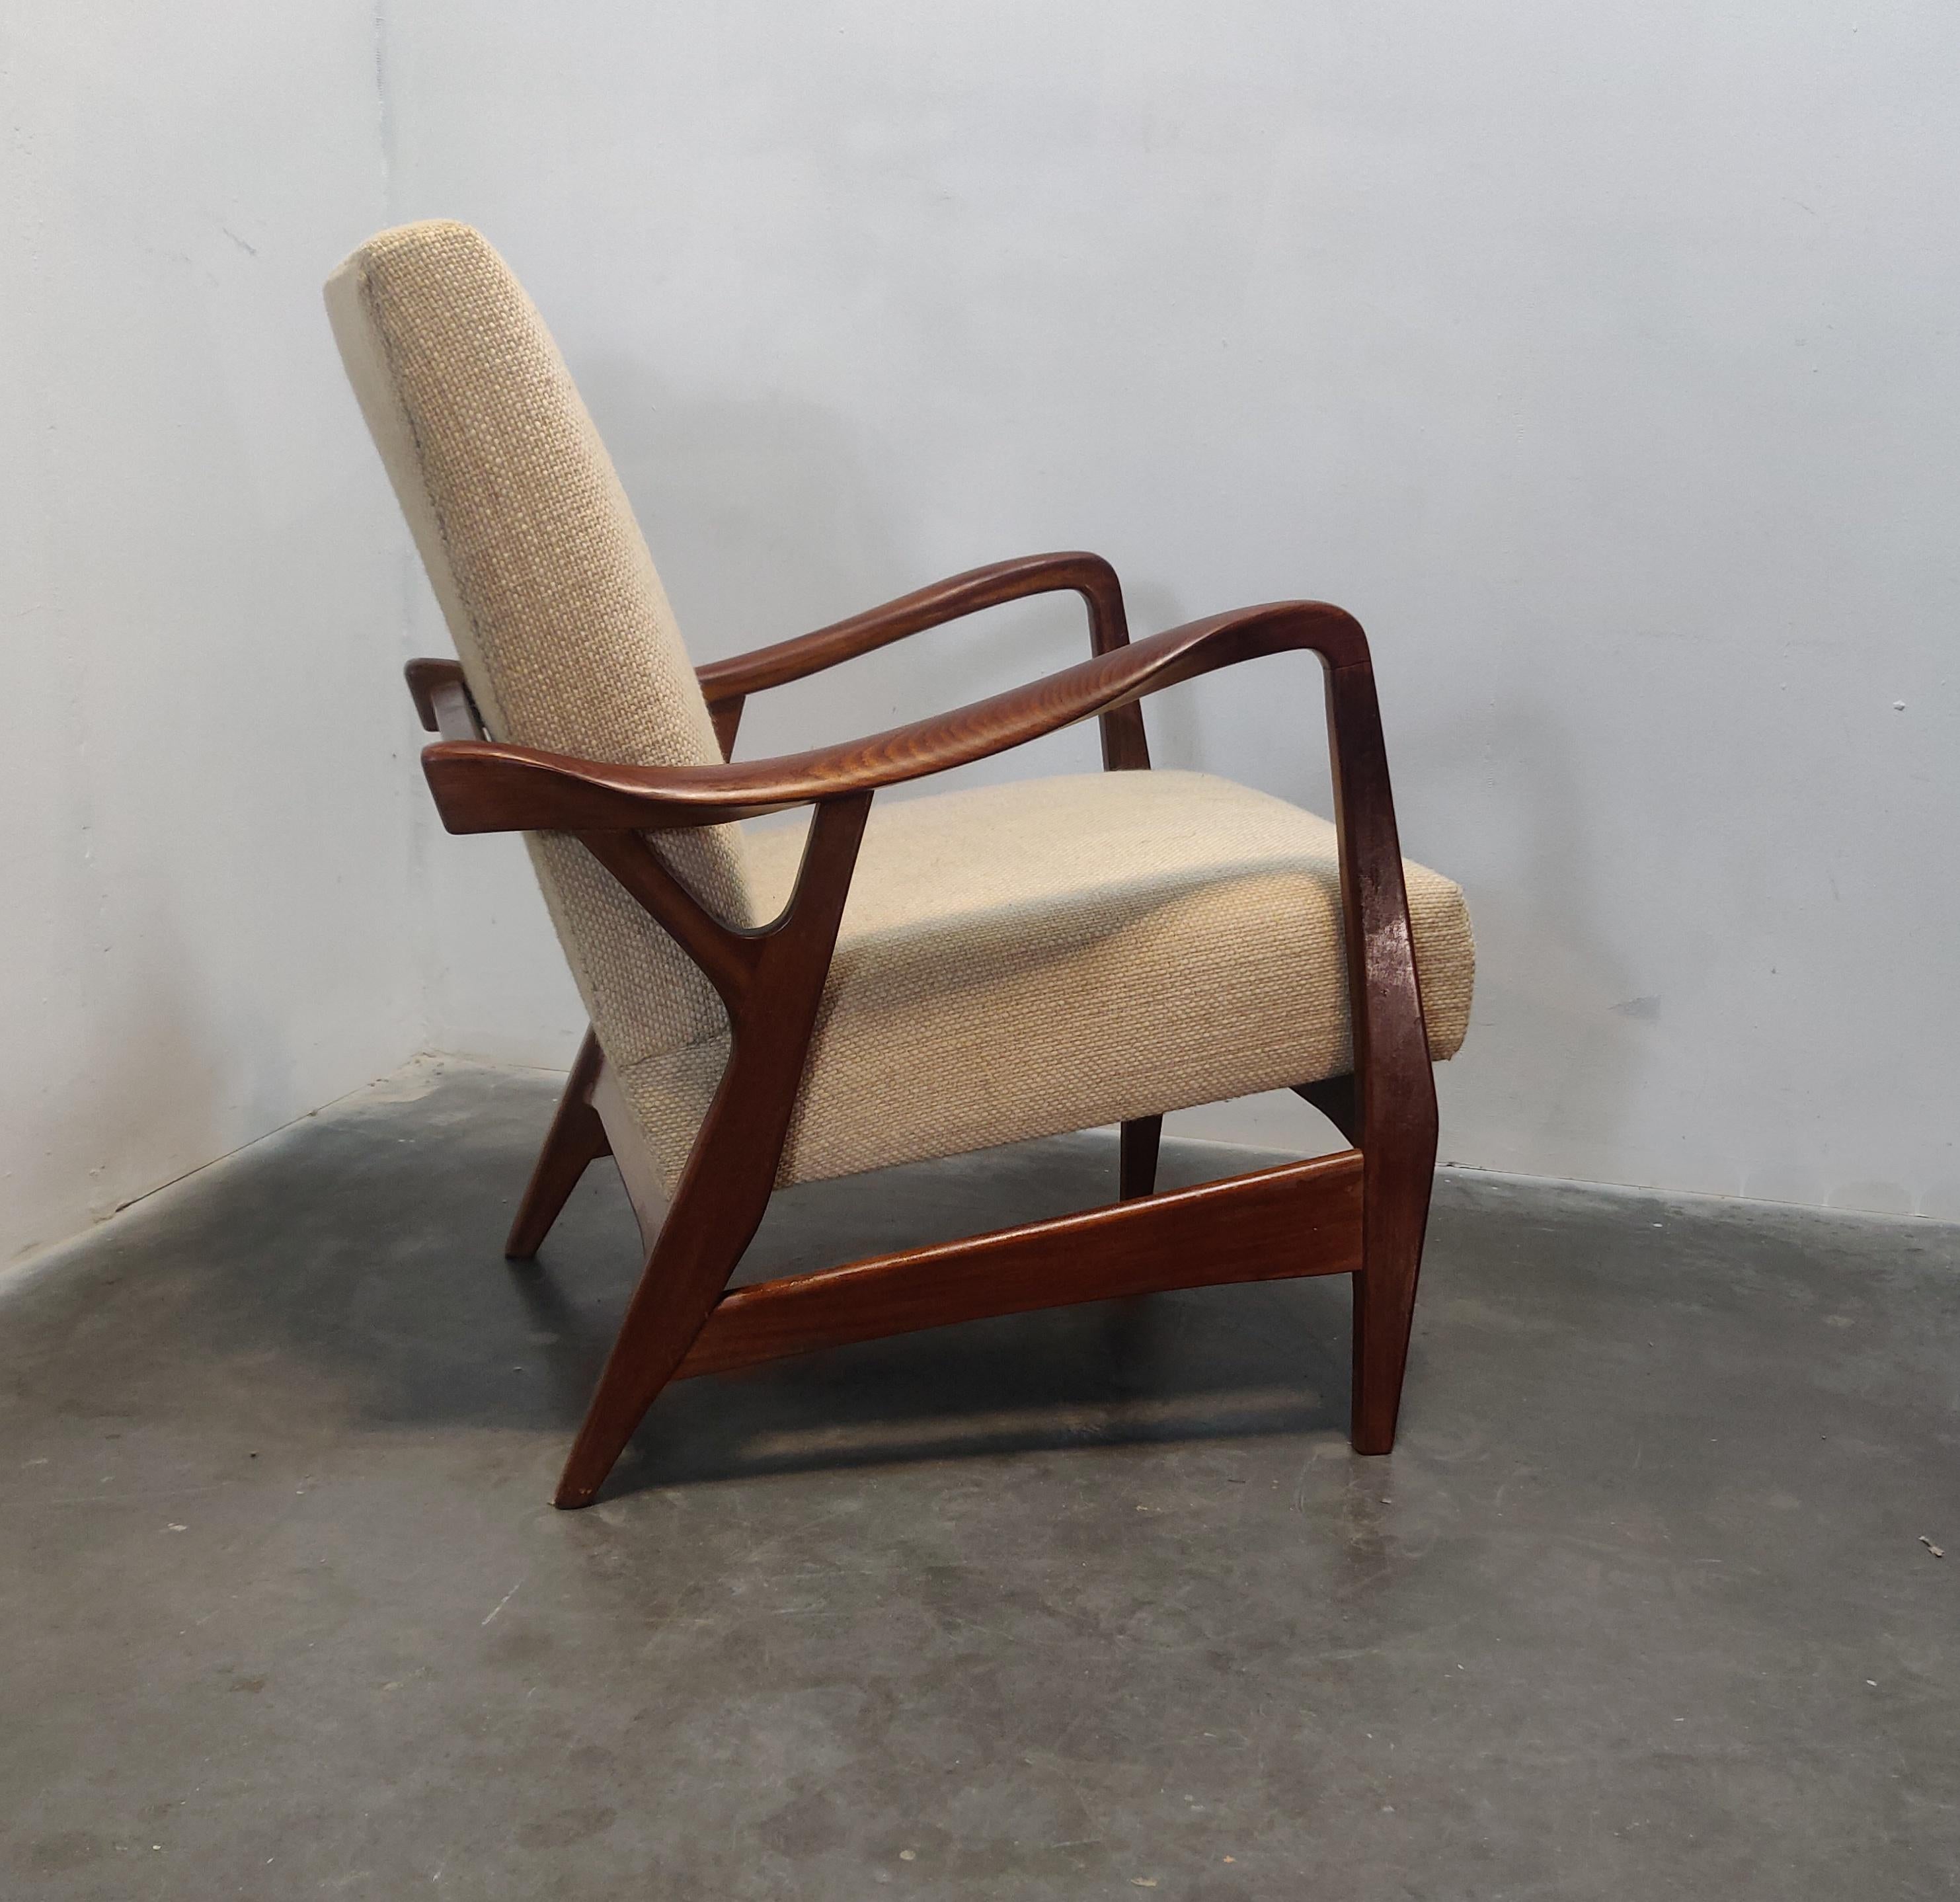 Mid-20th Century Organic Shaped Massive Teak Lounge Chair by Topform, 1950s For Sale